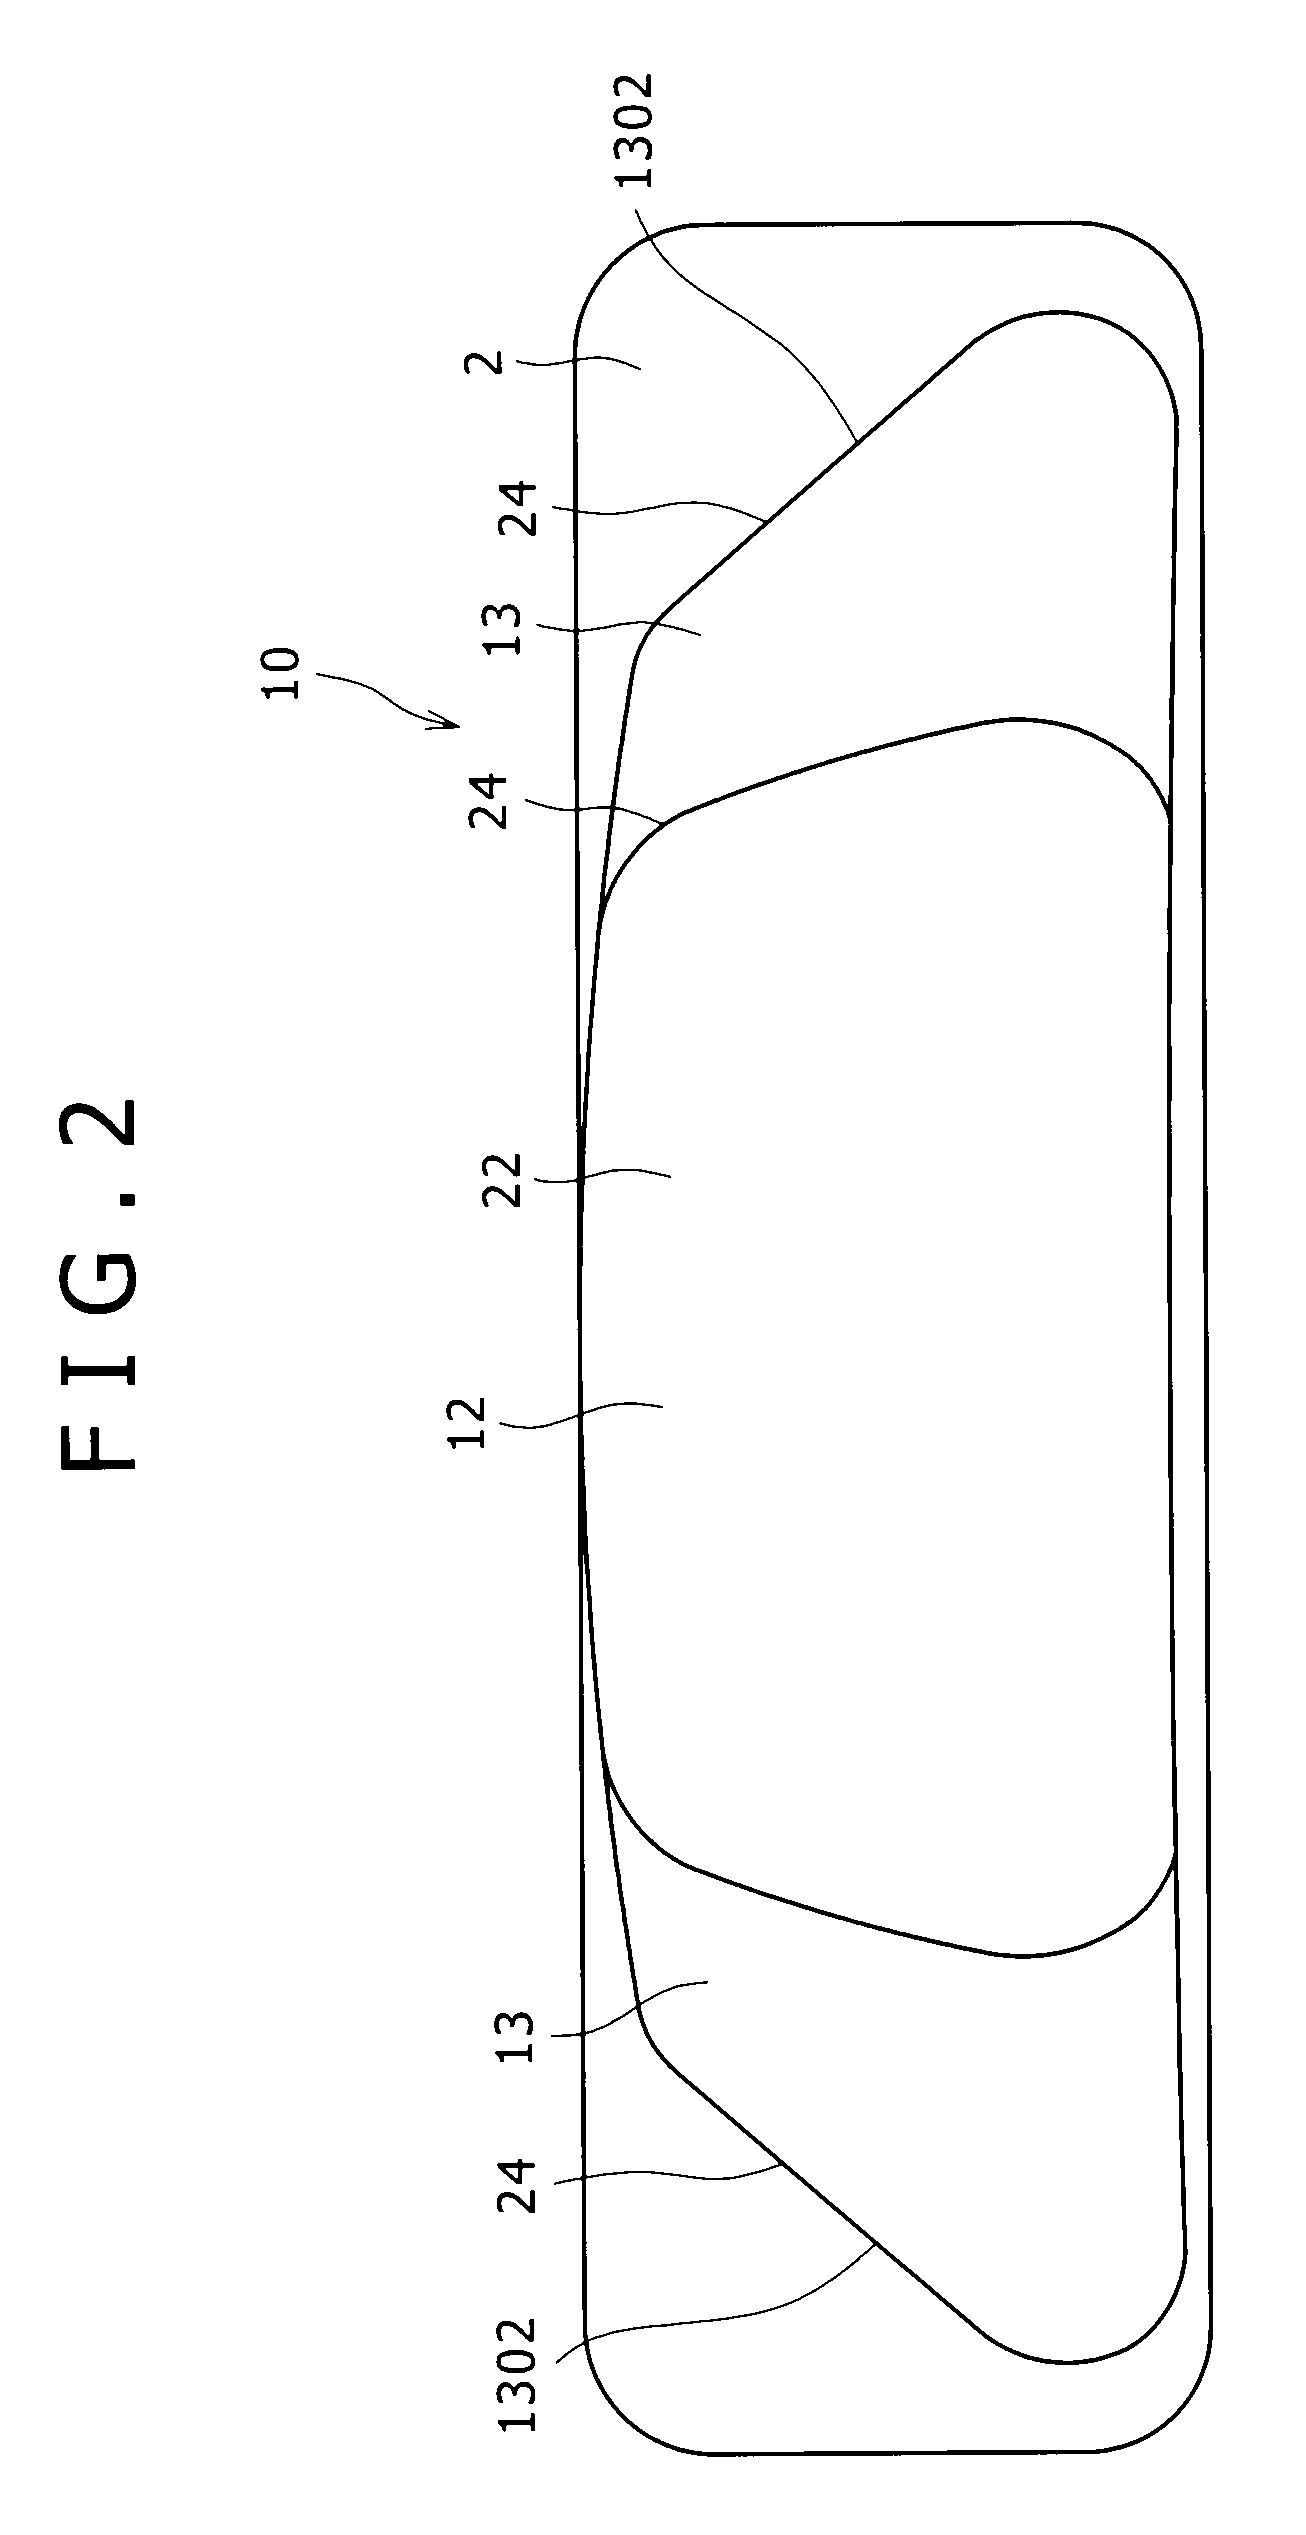 Speaker system with a plurality of openings in side walls of each of two speaker boxes